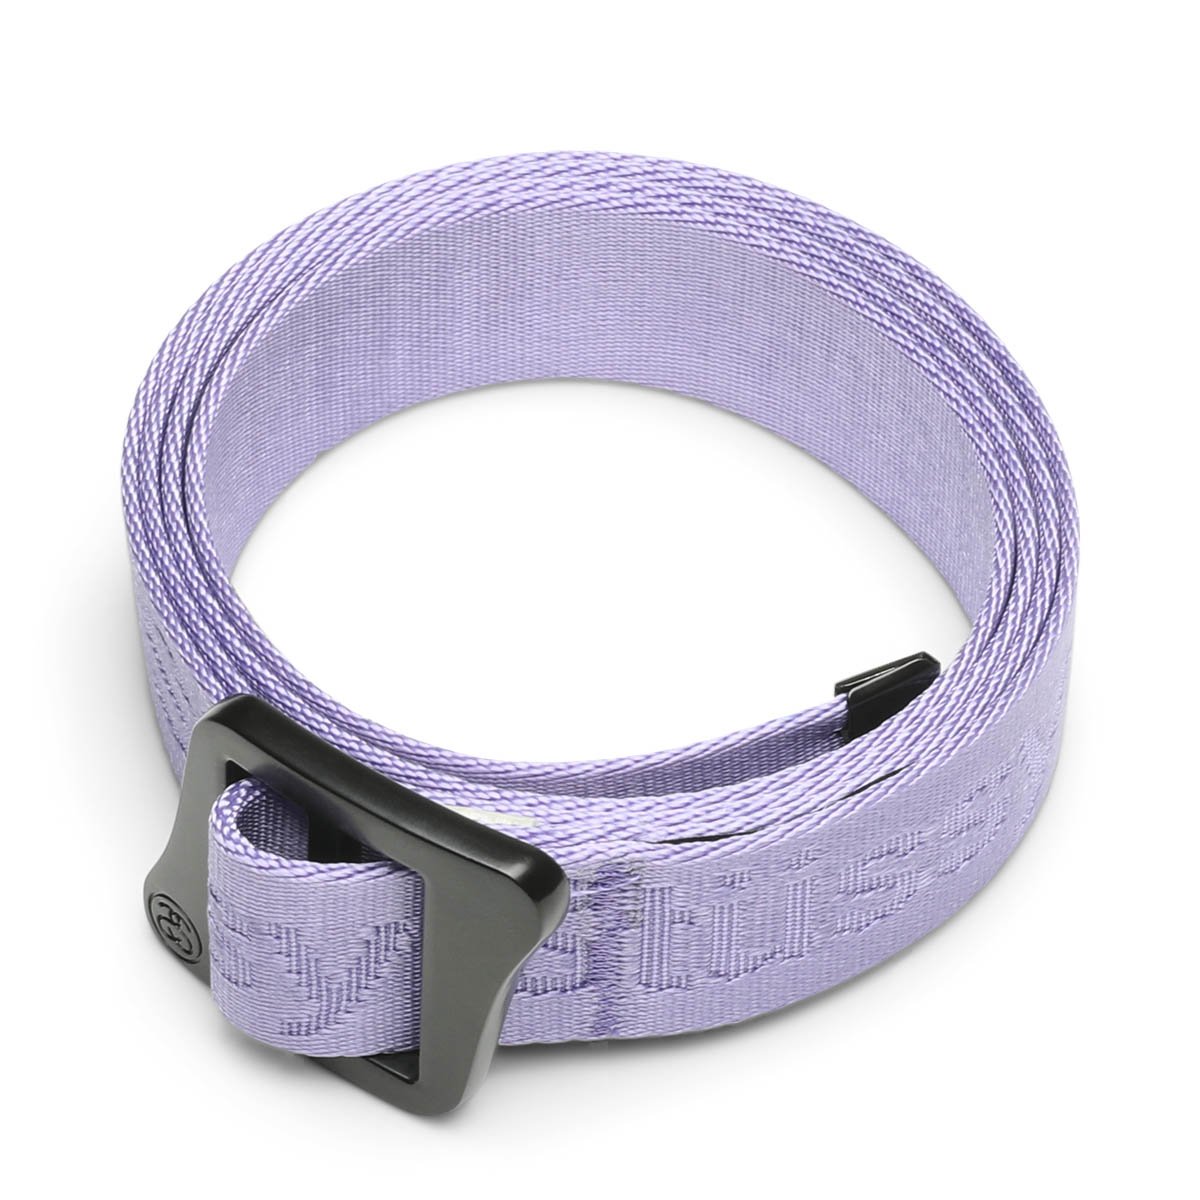 Stussy Bags & Accessories LAVENDER / O/S JACQUARD CLIMBING BELT